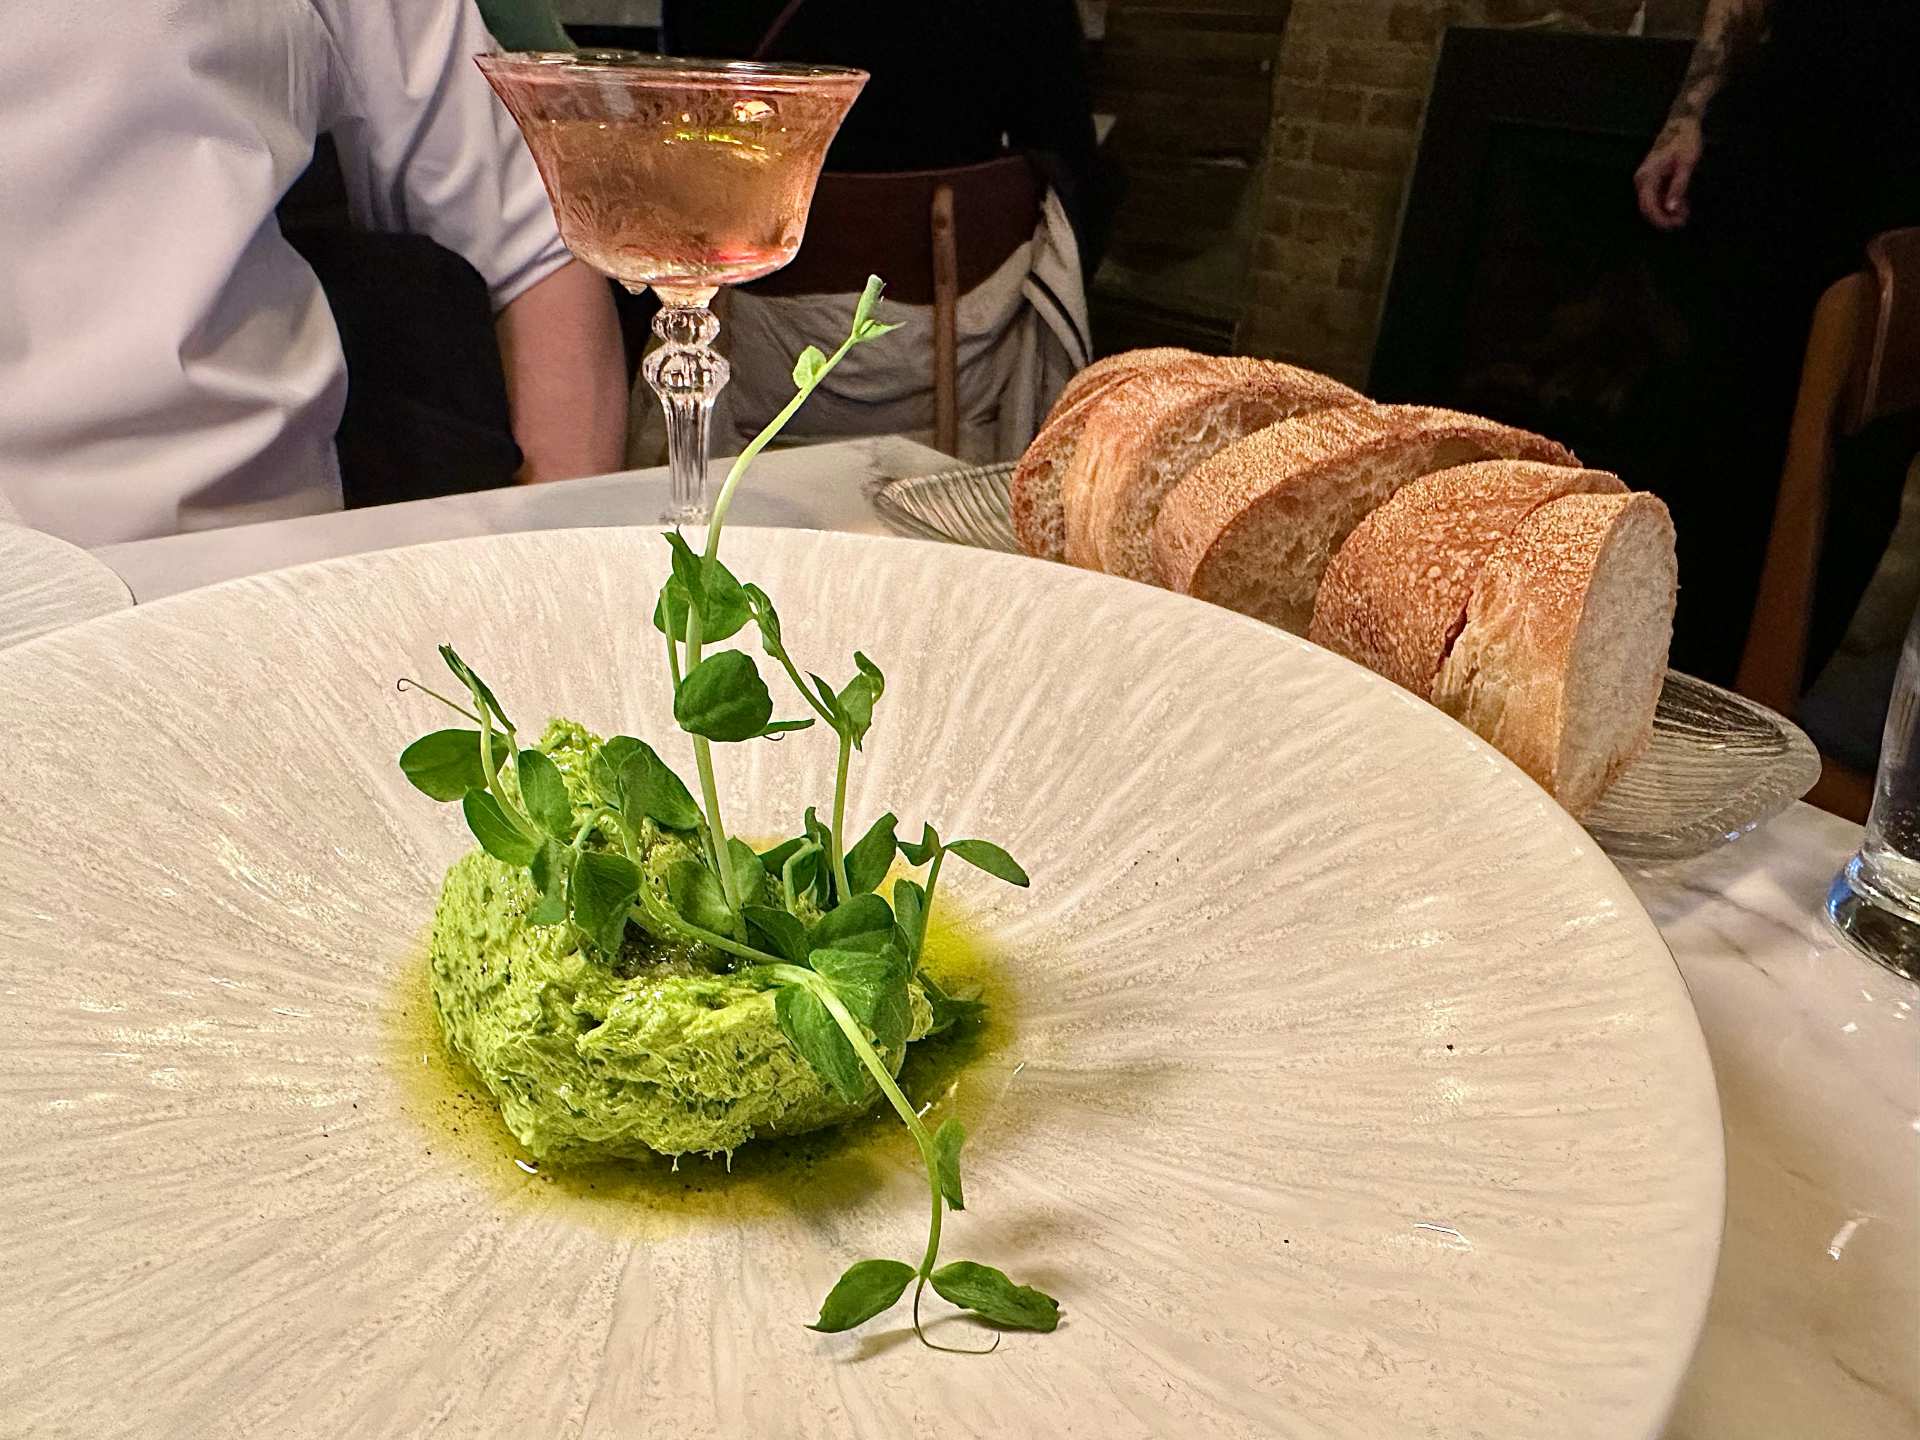 Spring onion and pea shoot butter with bread at The Hamptons restaurant in Toronto